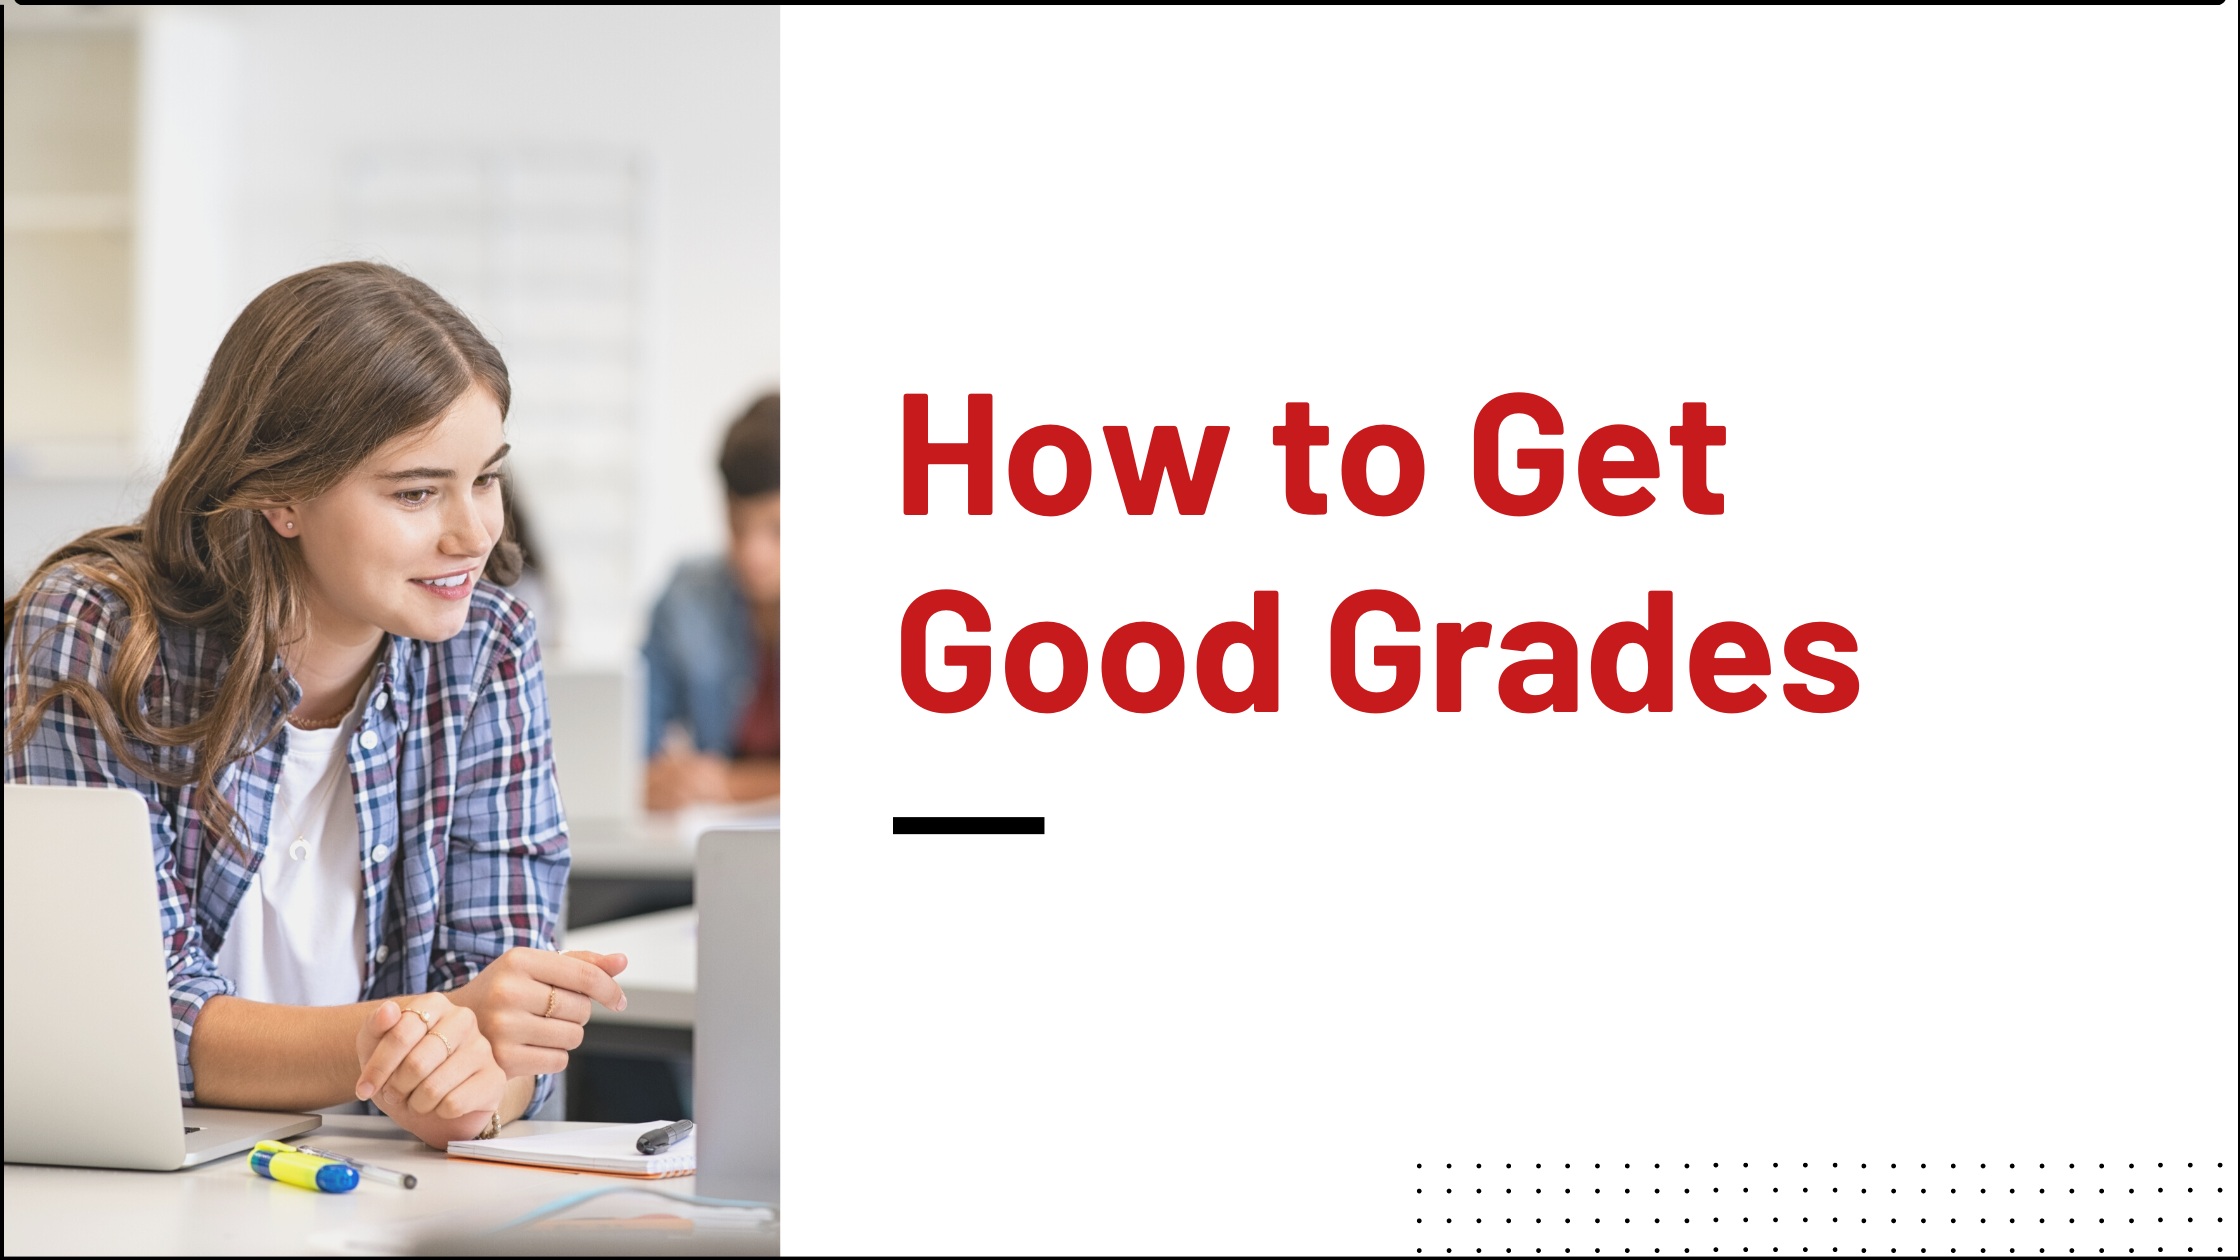 Making School Work For You: How to Get Good Grades and Raise Your GPA